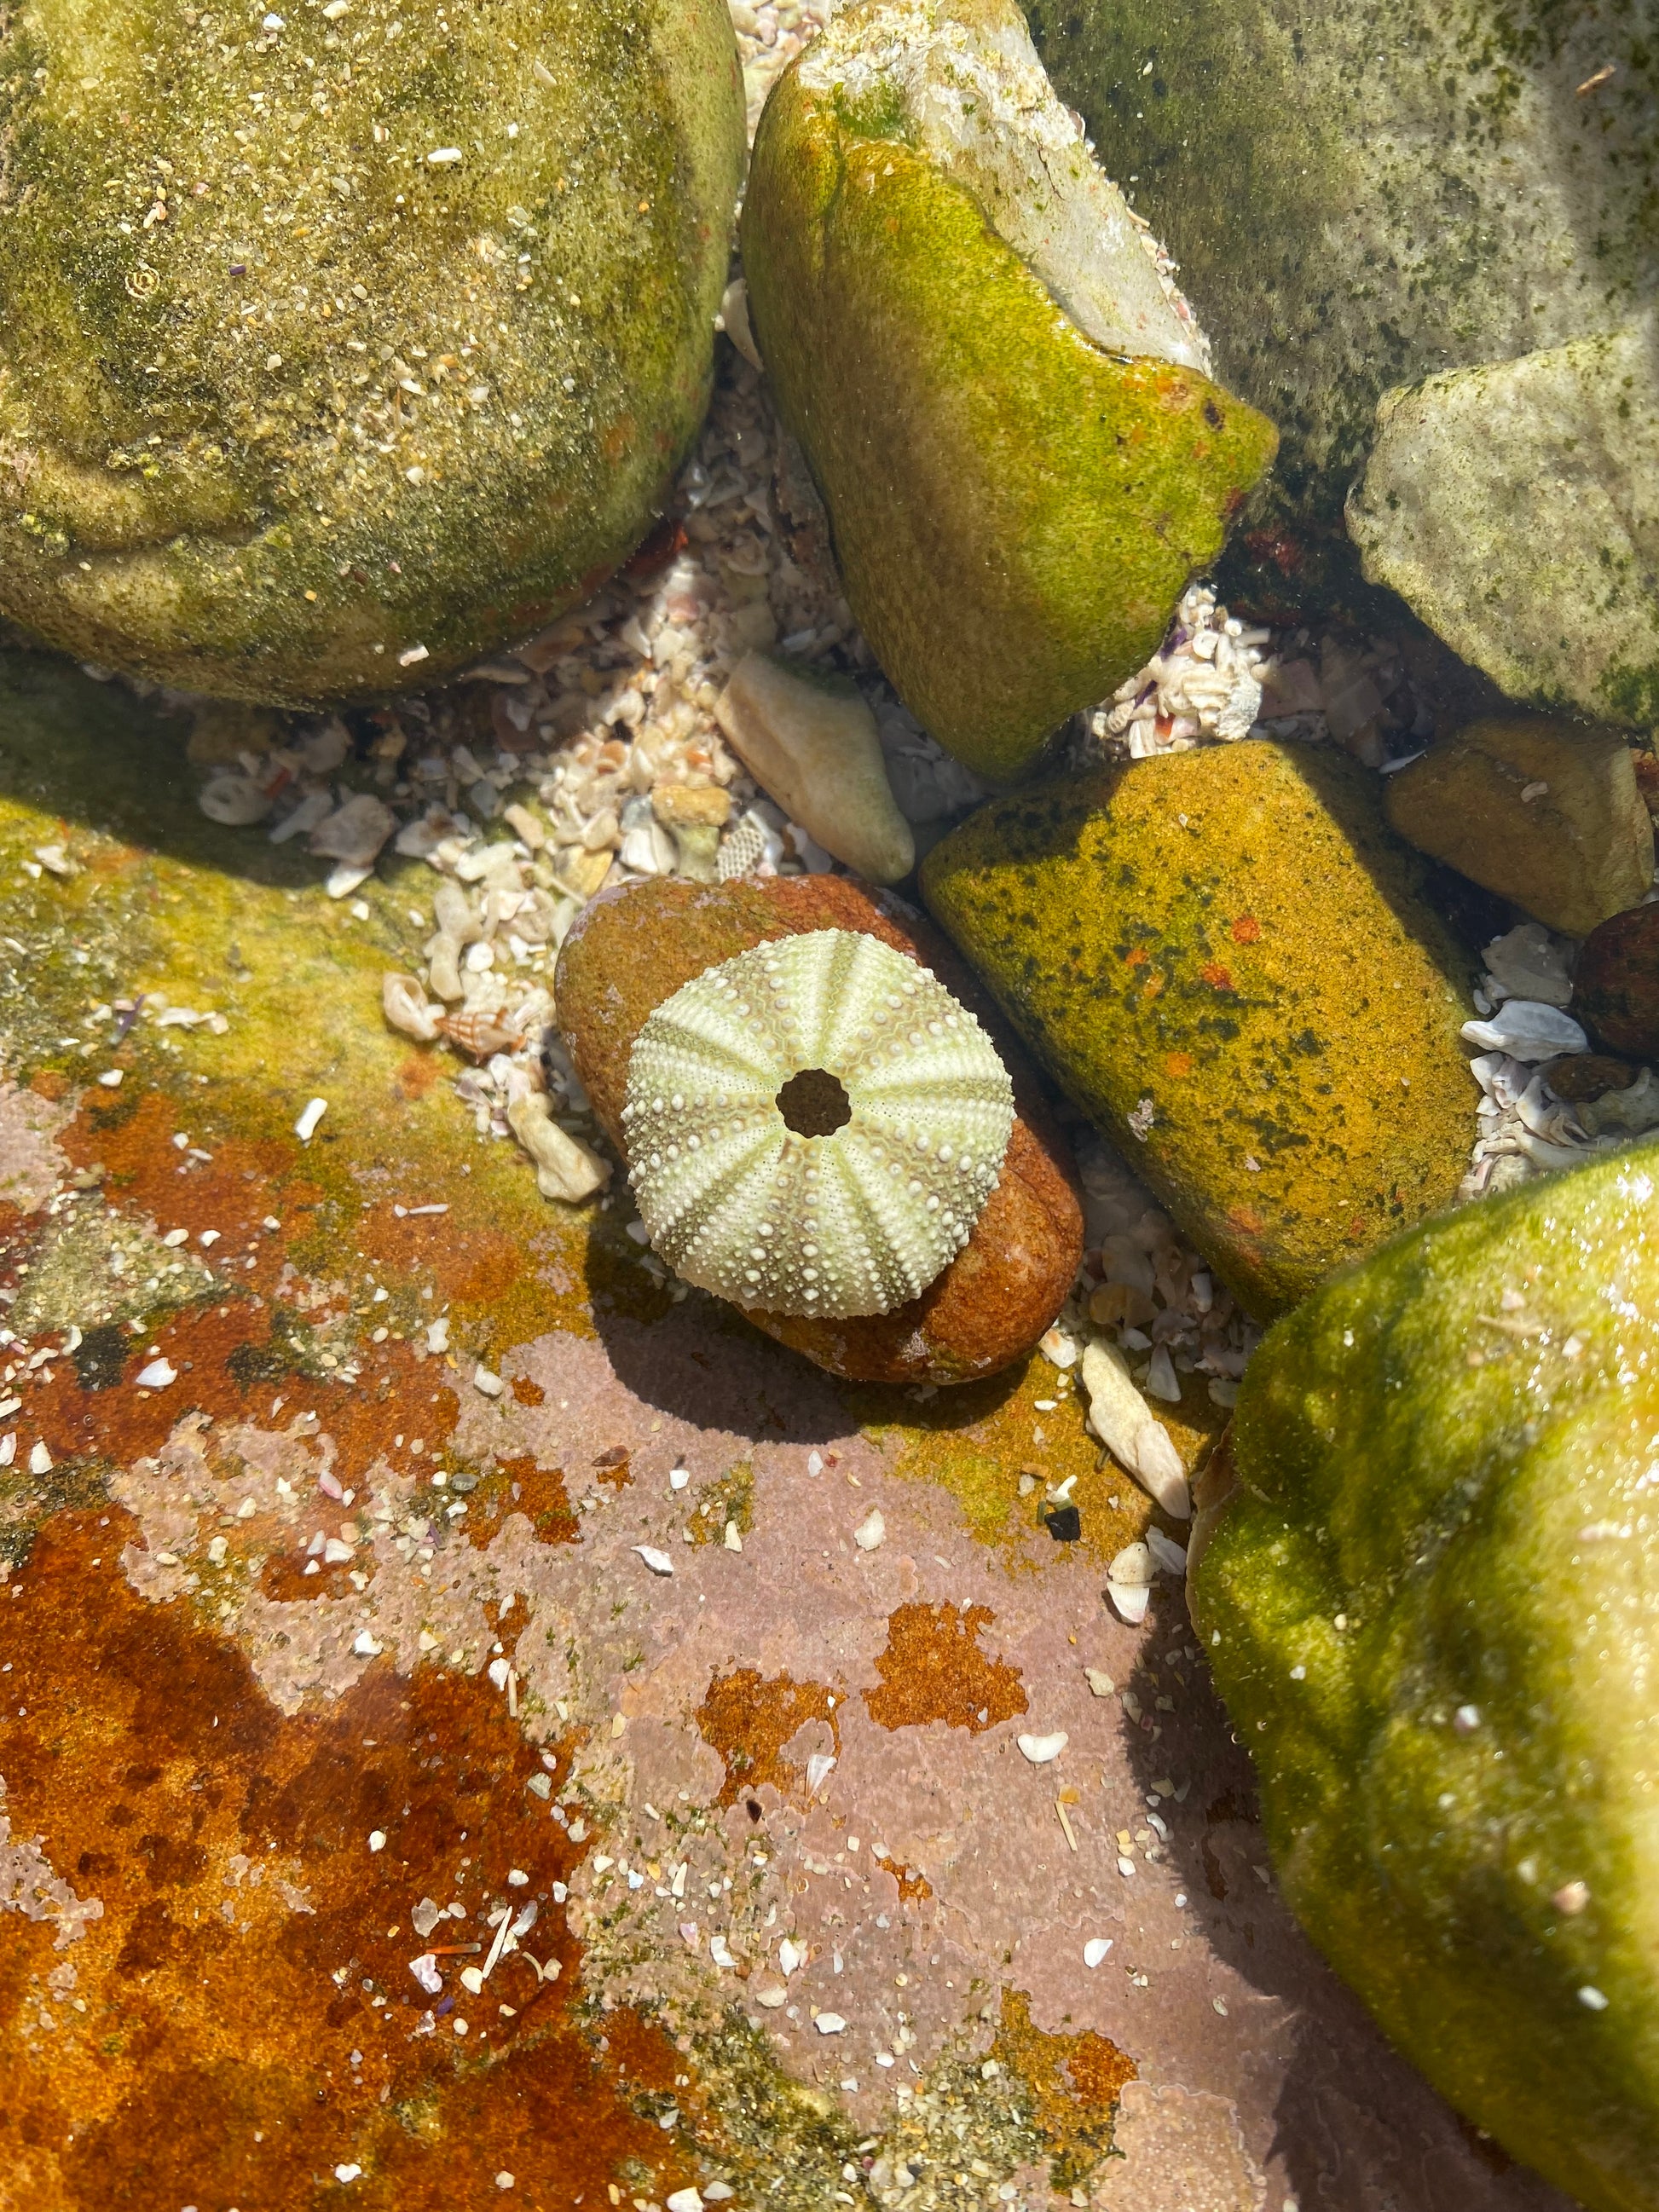 "Small sterling silver sea urchin pendant juxtaposed with its natural counterpart among rocks and moss, illustrating the inspiration behind the design.